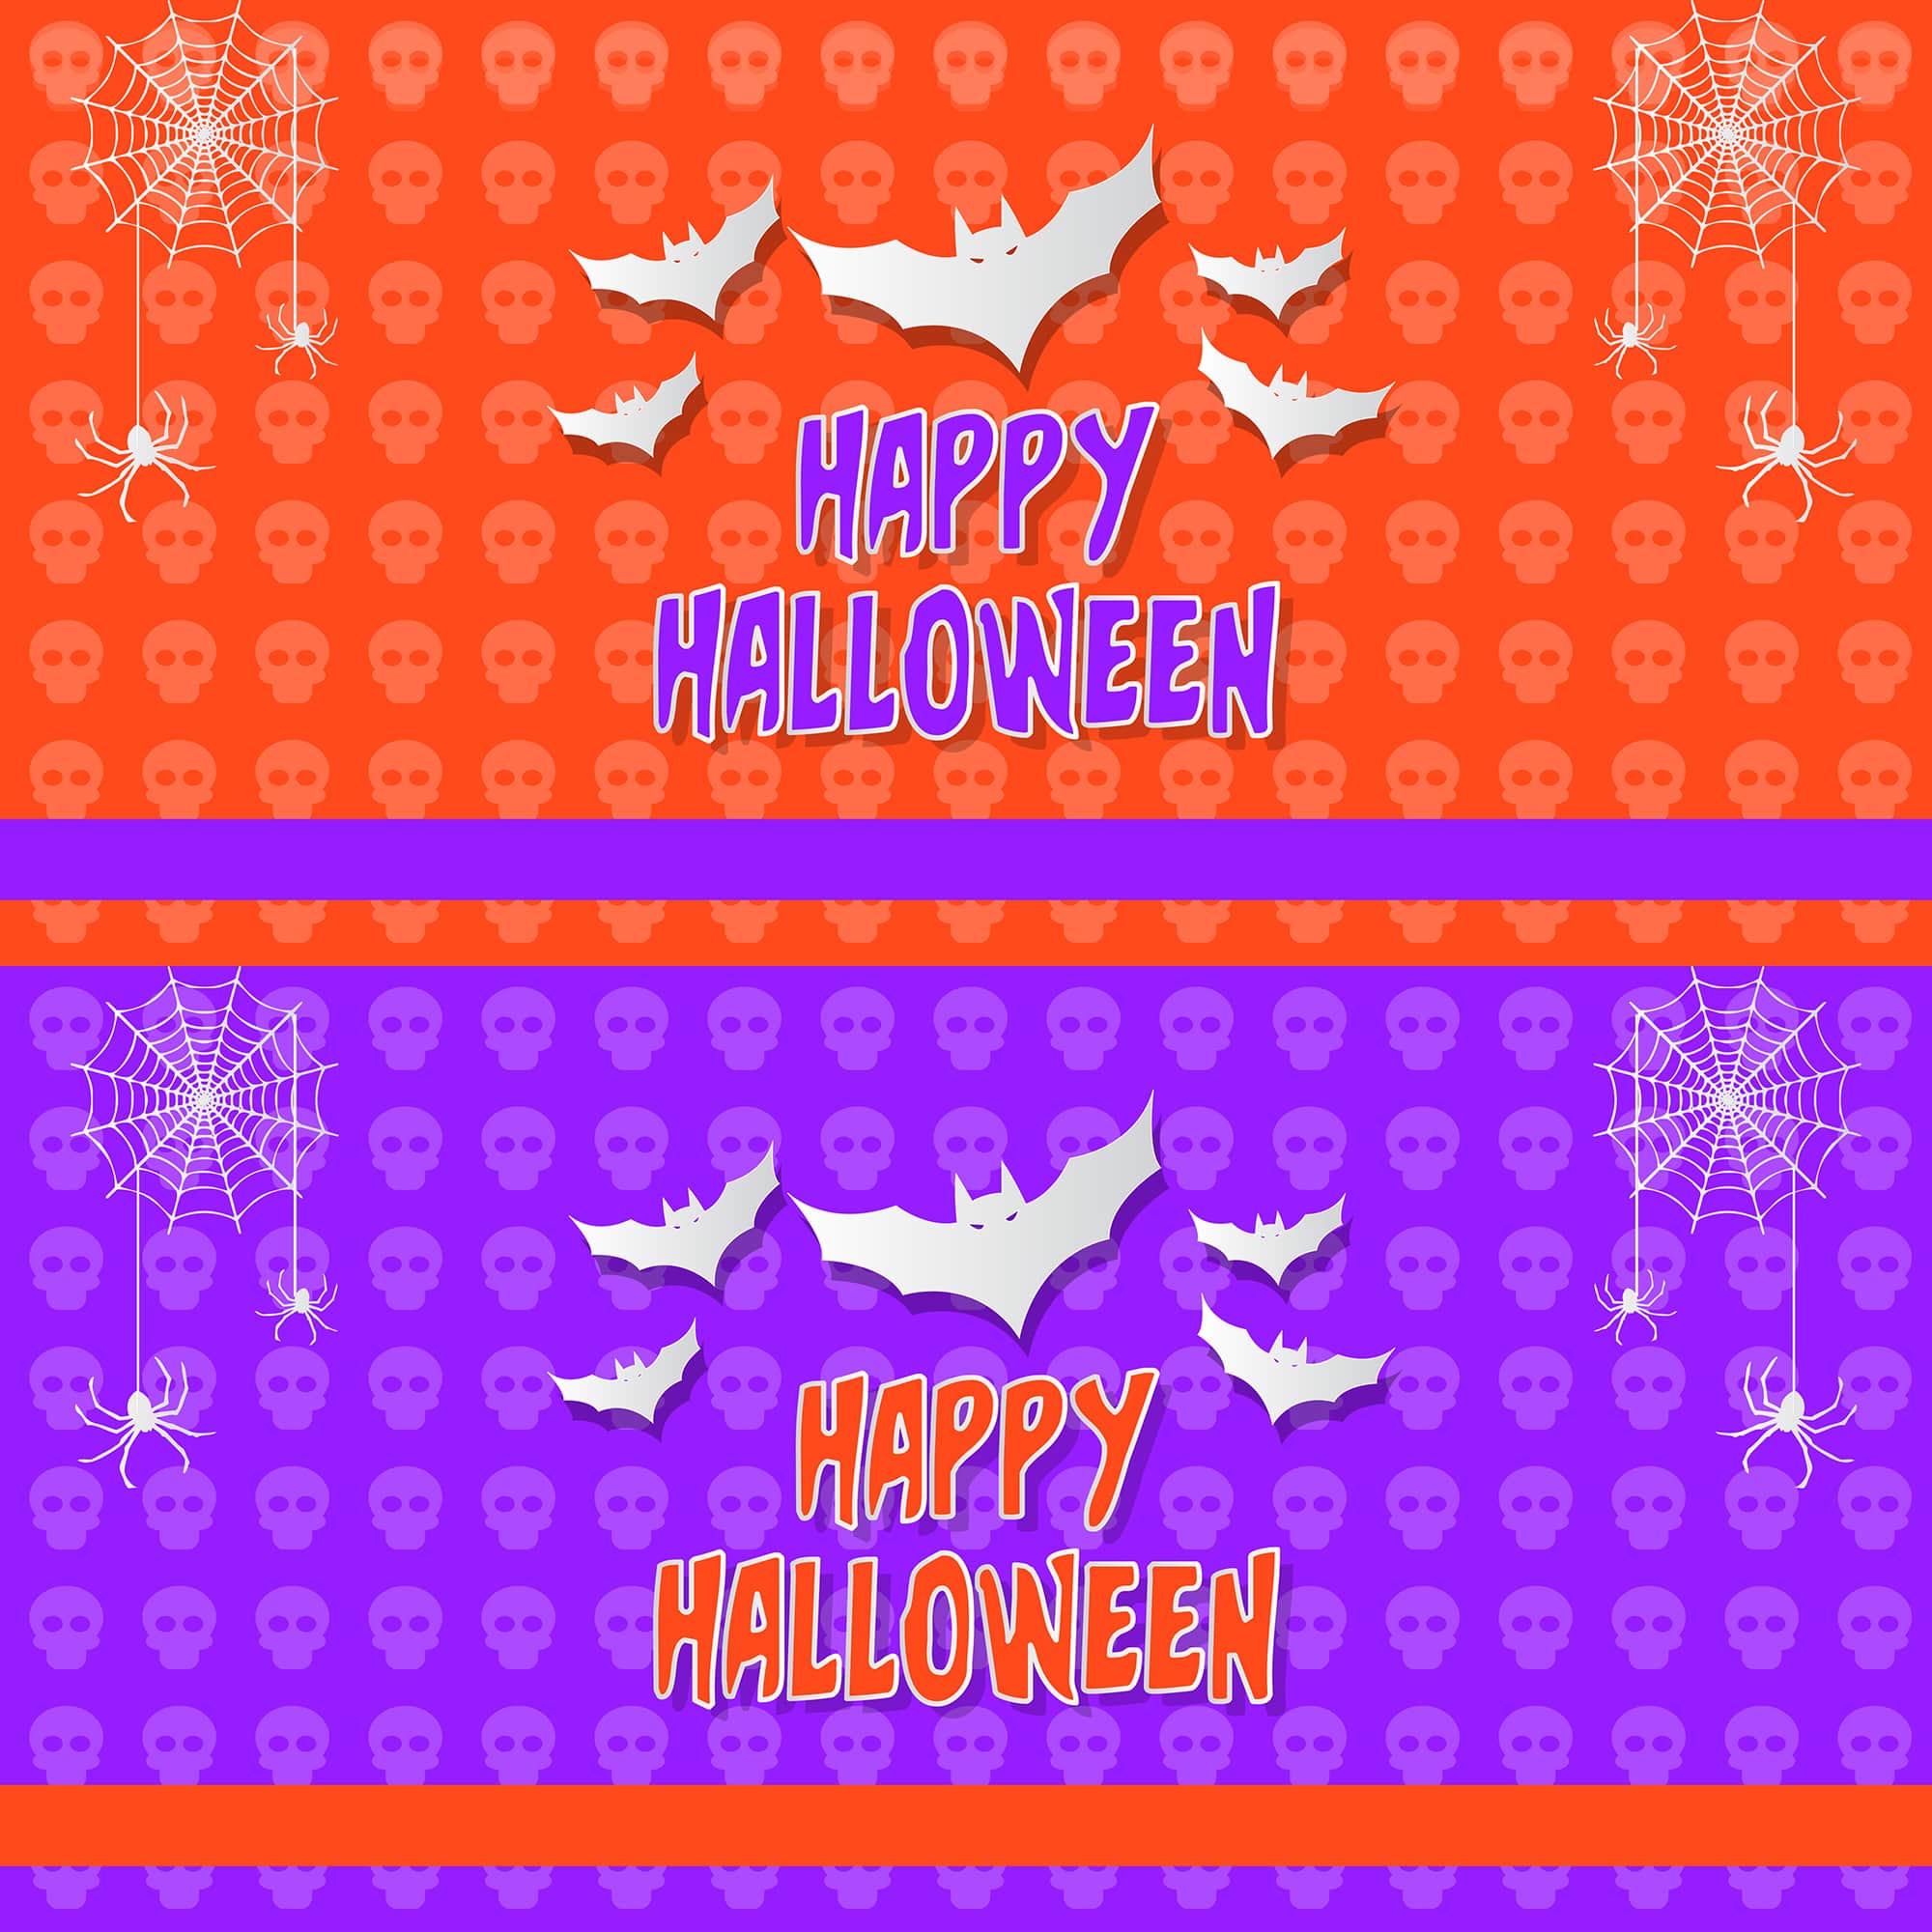 Set of Happy Halloween vector banner templates for free download in orange and violet background